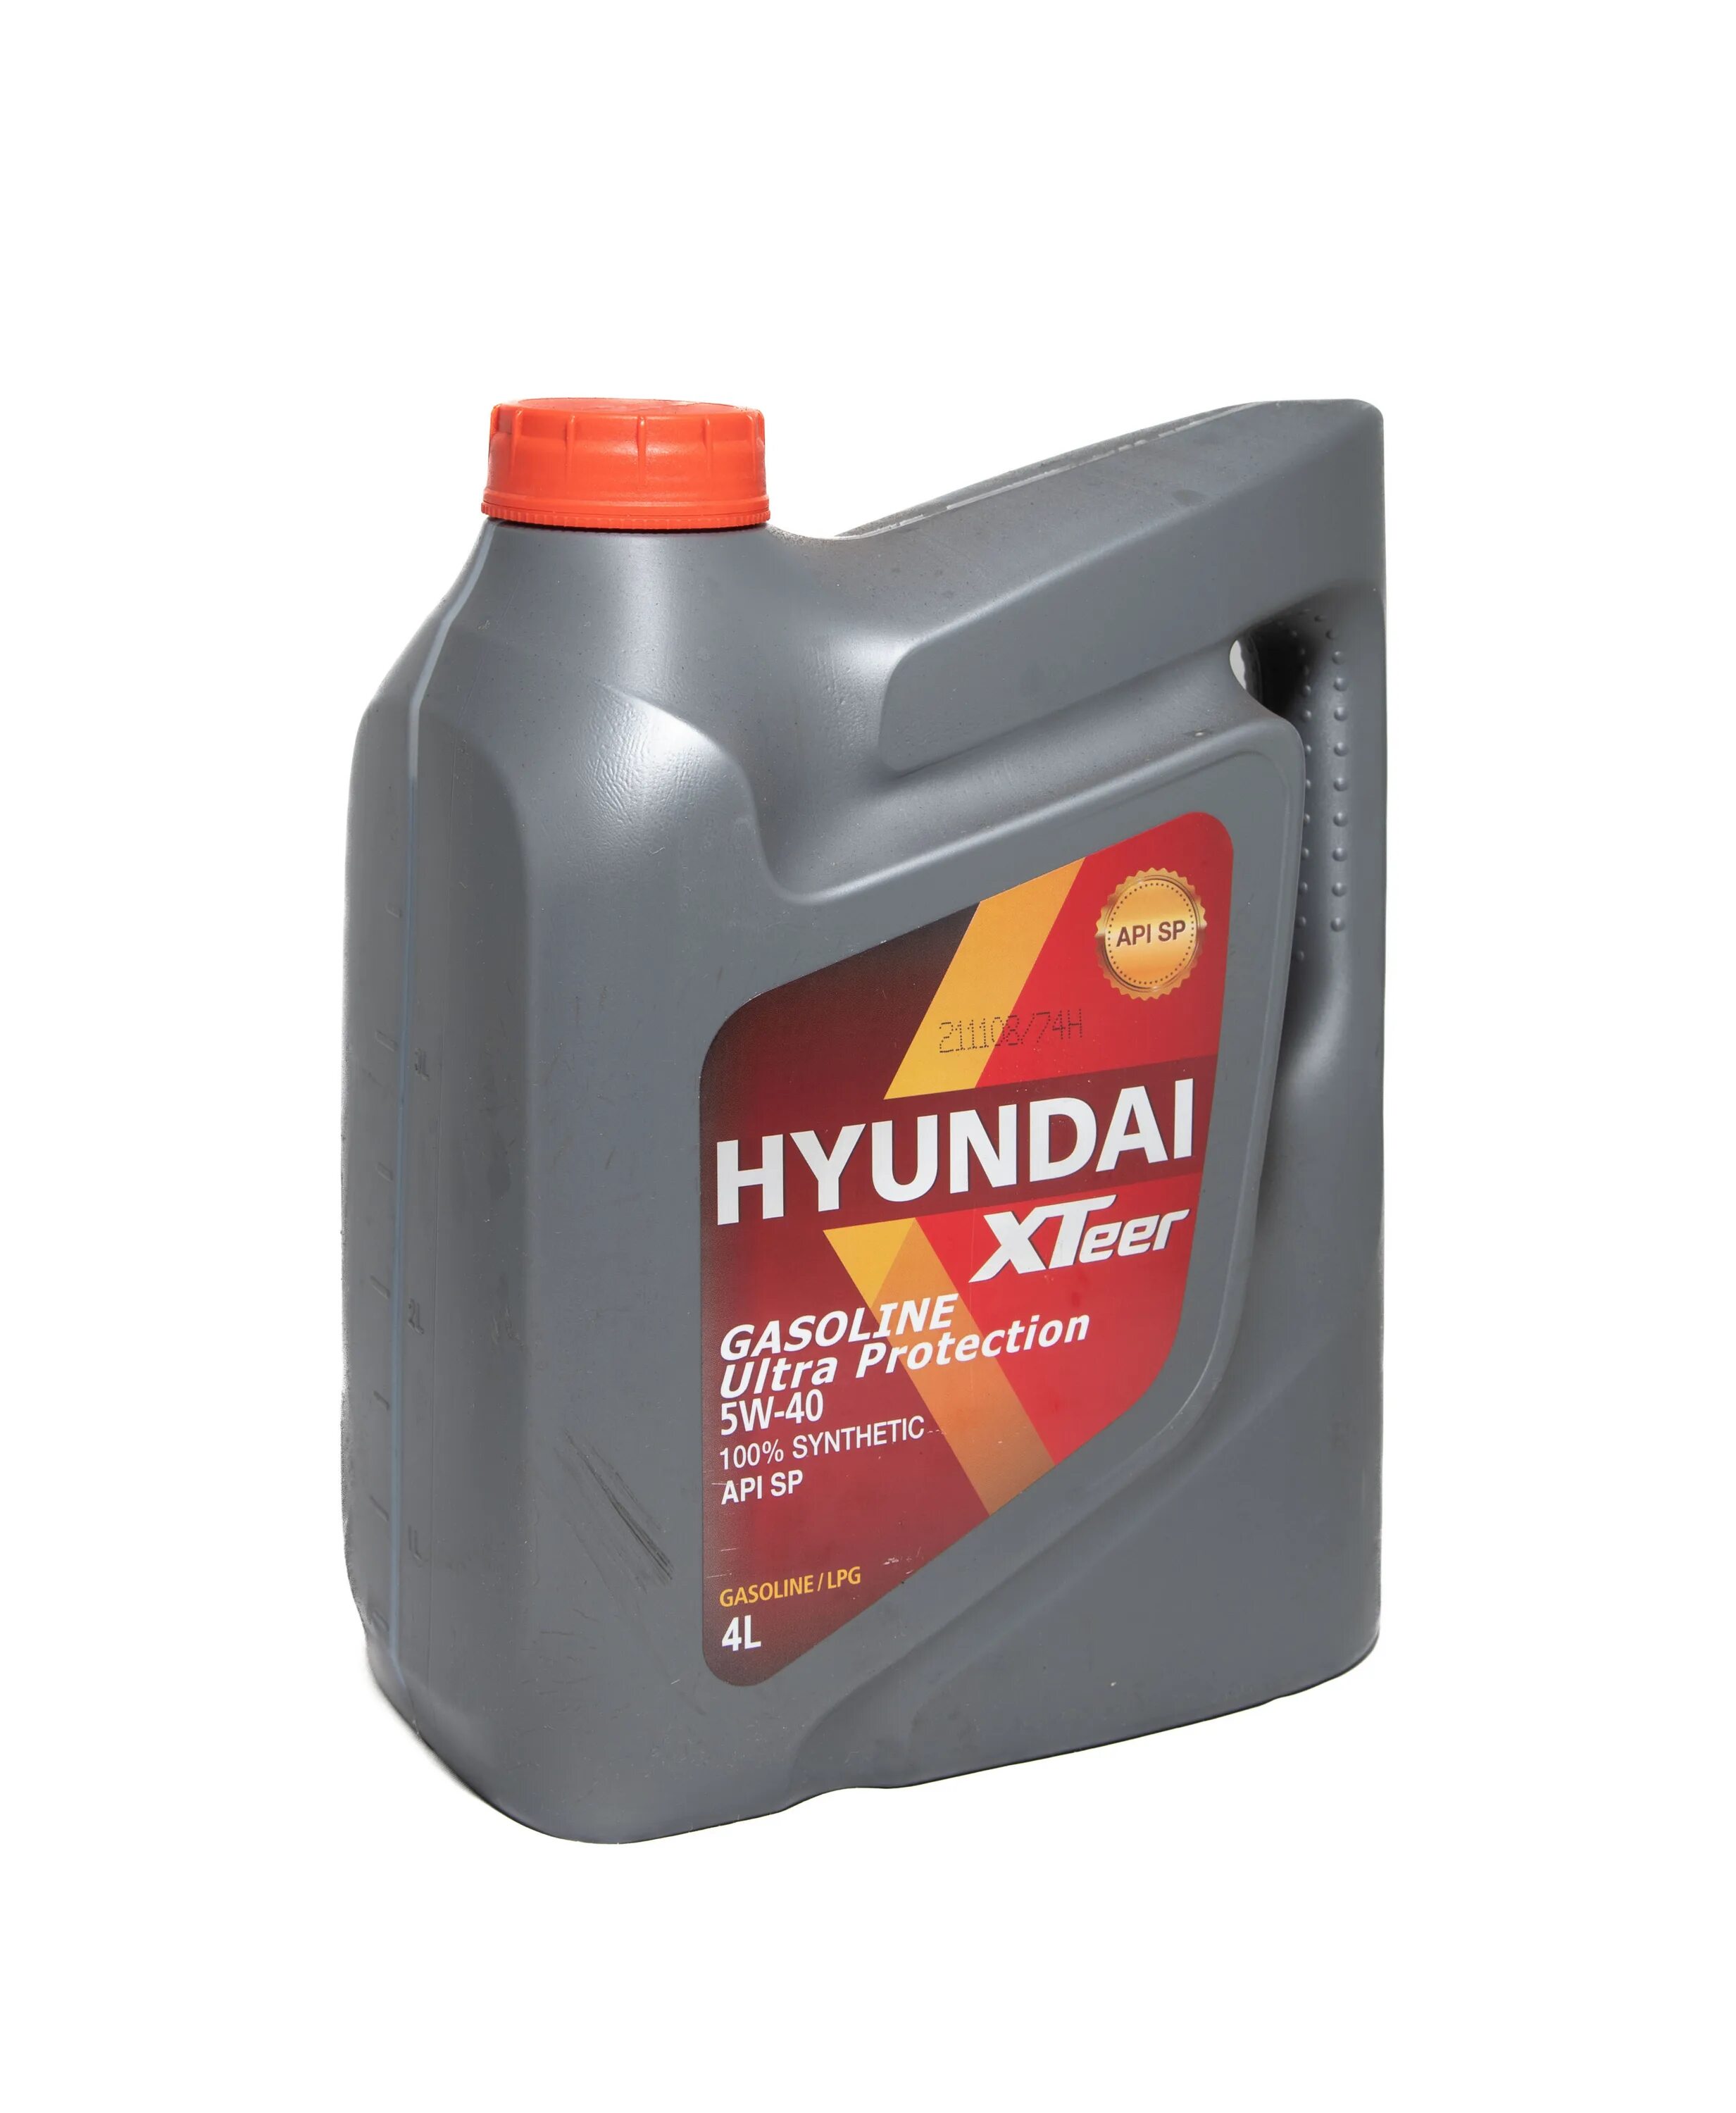 Моторное масло xteer 5w40. Hyundai XTEER 5w40 4л. Hyundai XTEER 5w30. 1011413 Hyundai XTEER. Hyundai XTEER gasoline Ultra Protection 5w40 SP.